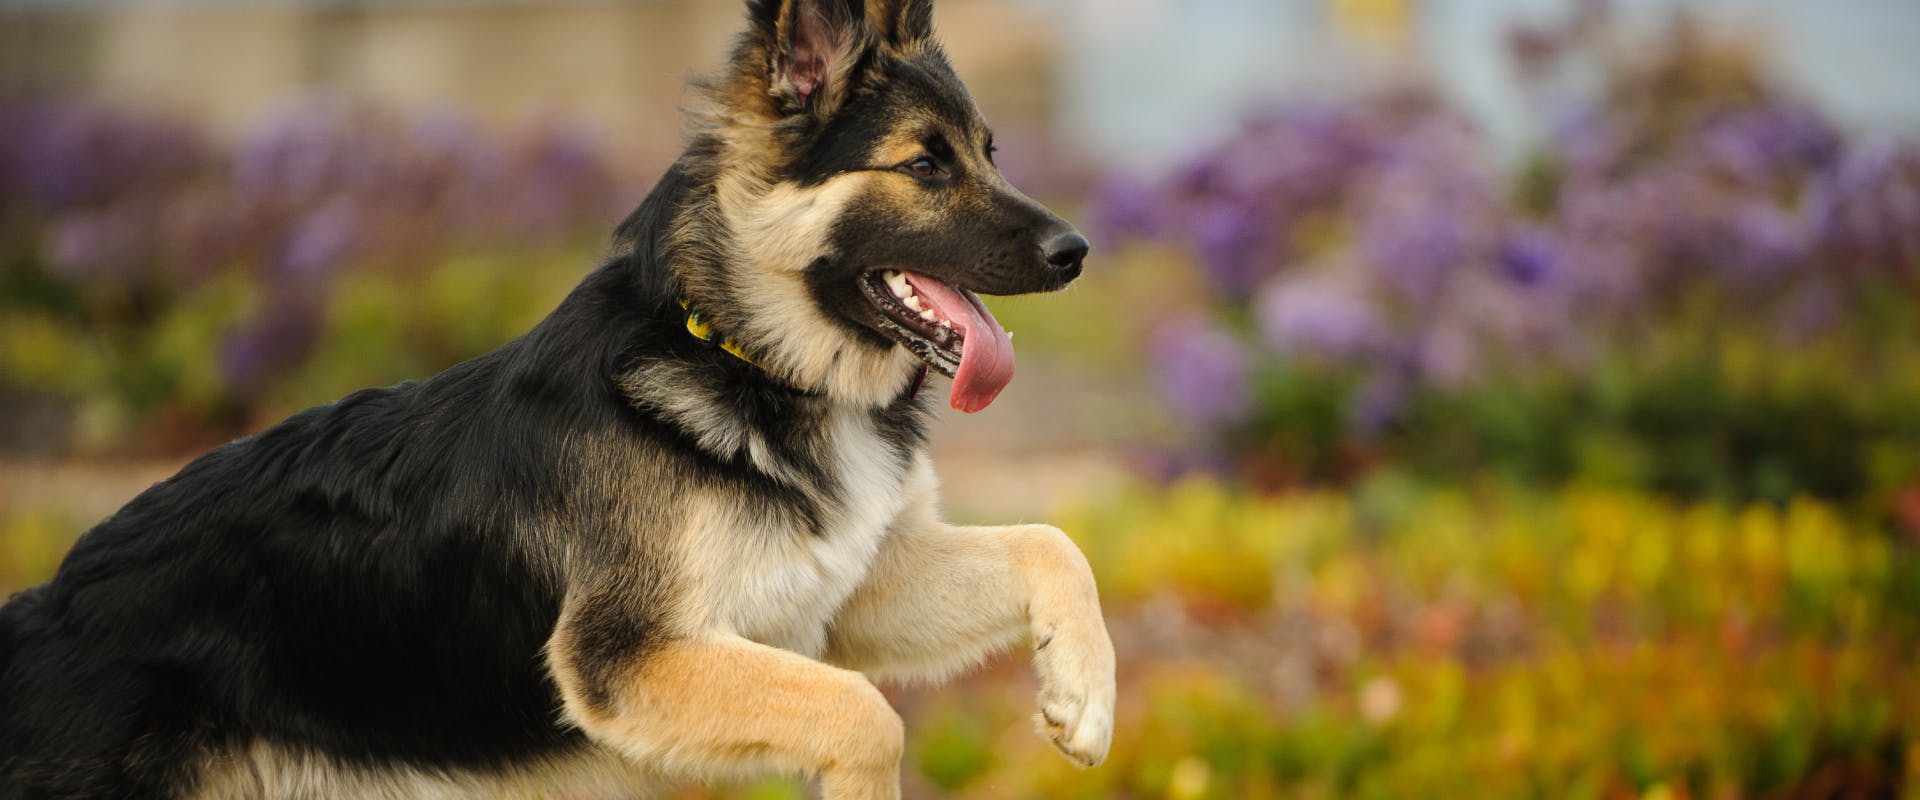 a German shepherd puppy bounding through a field with purple flowers in the background